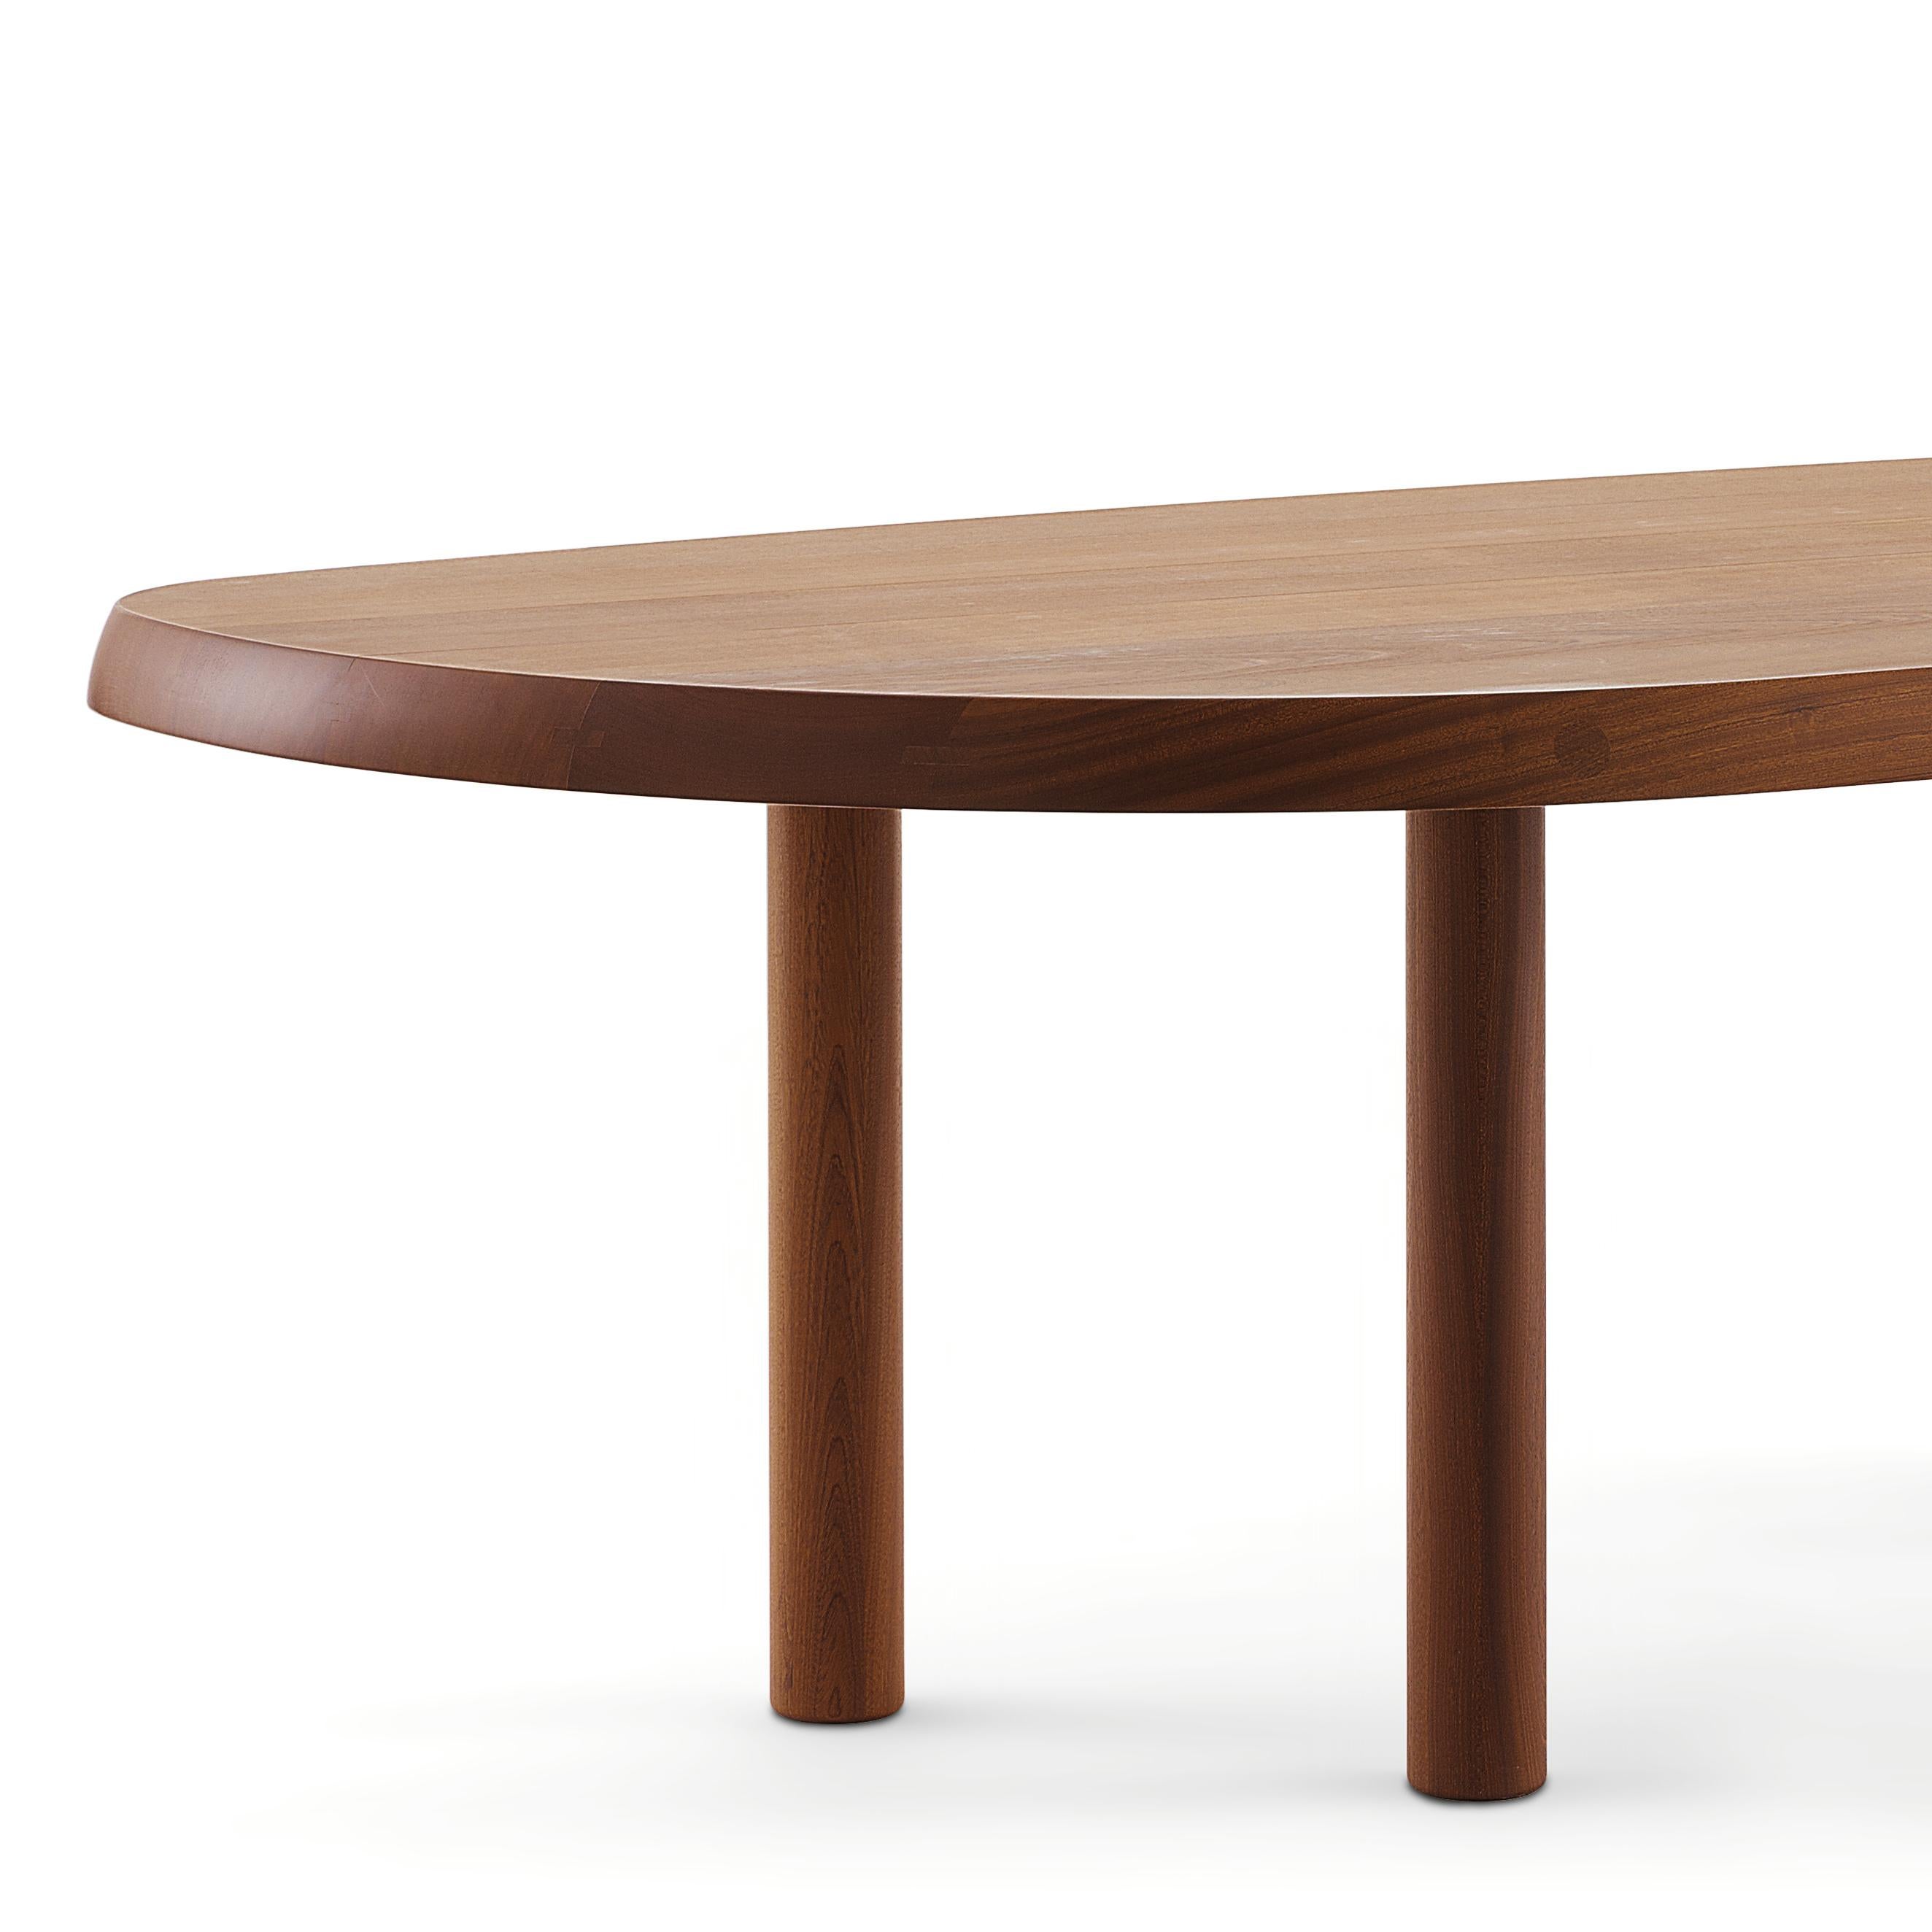 Italian Charlotte Perriand Table En Forme Libre, Wood by Cassina